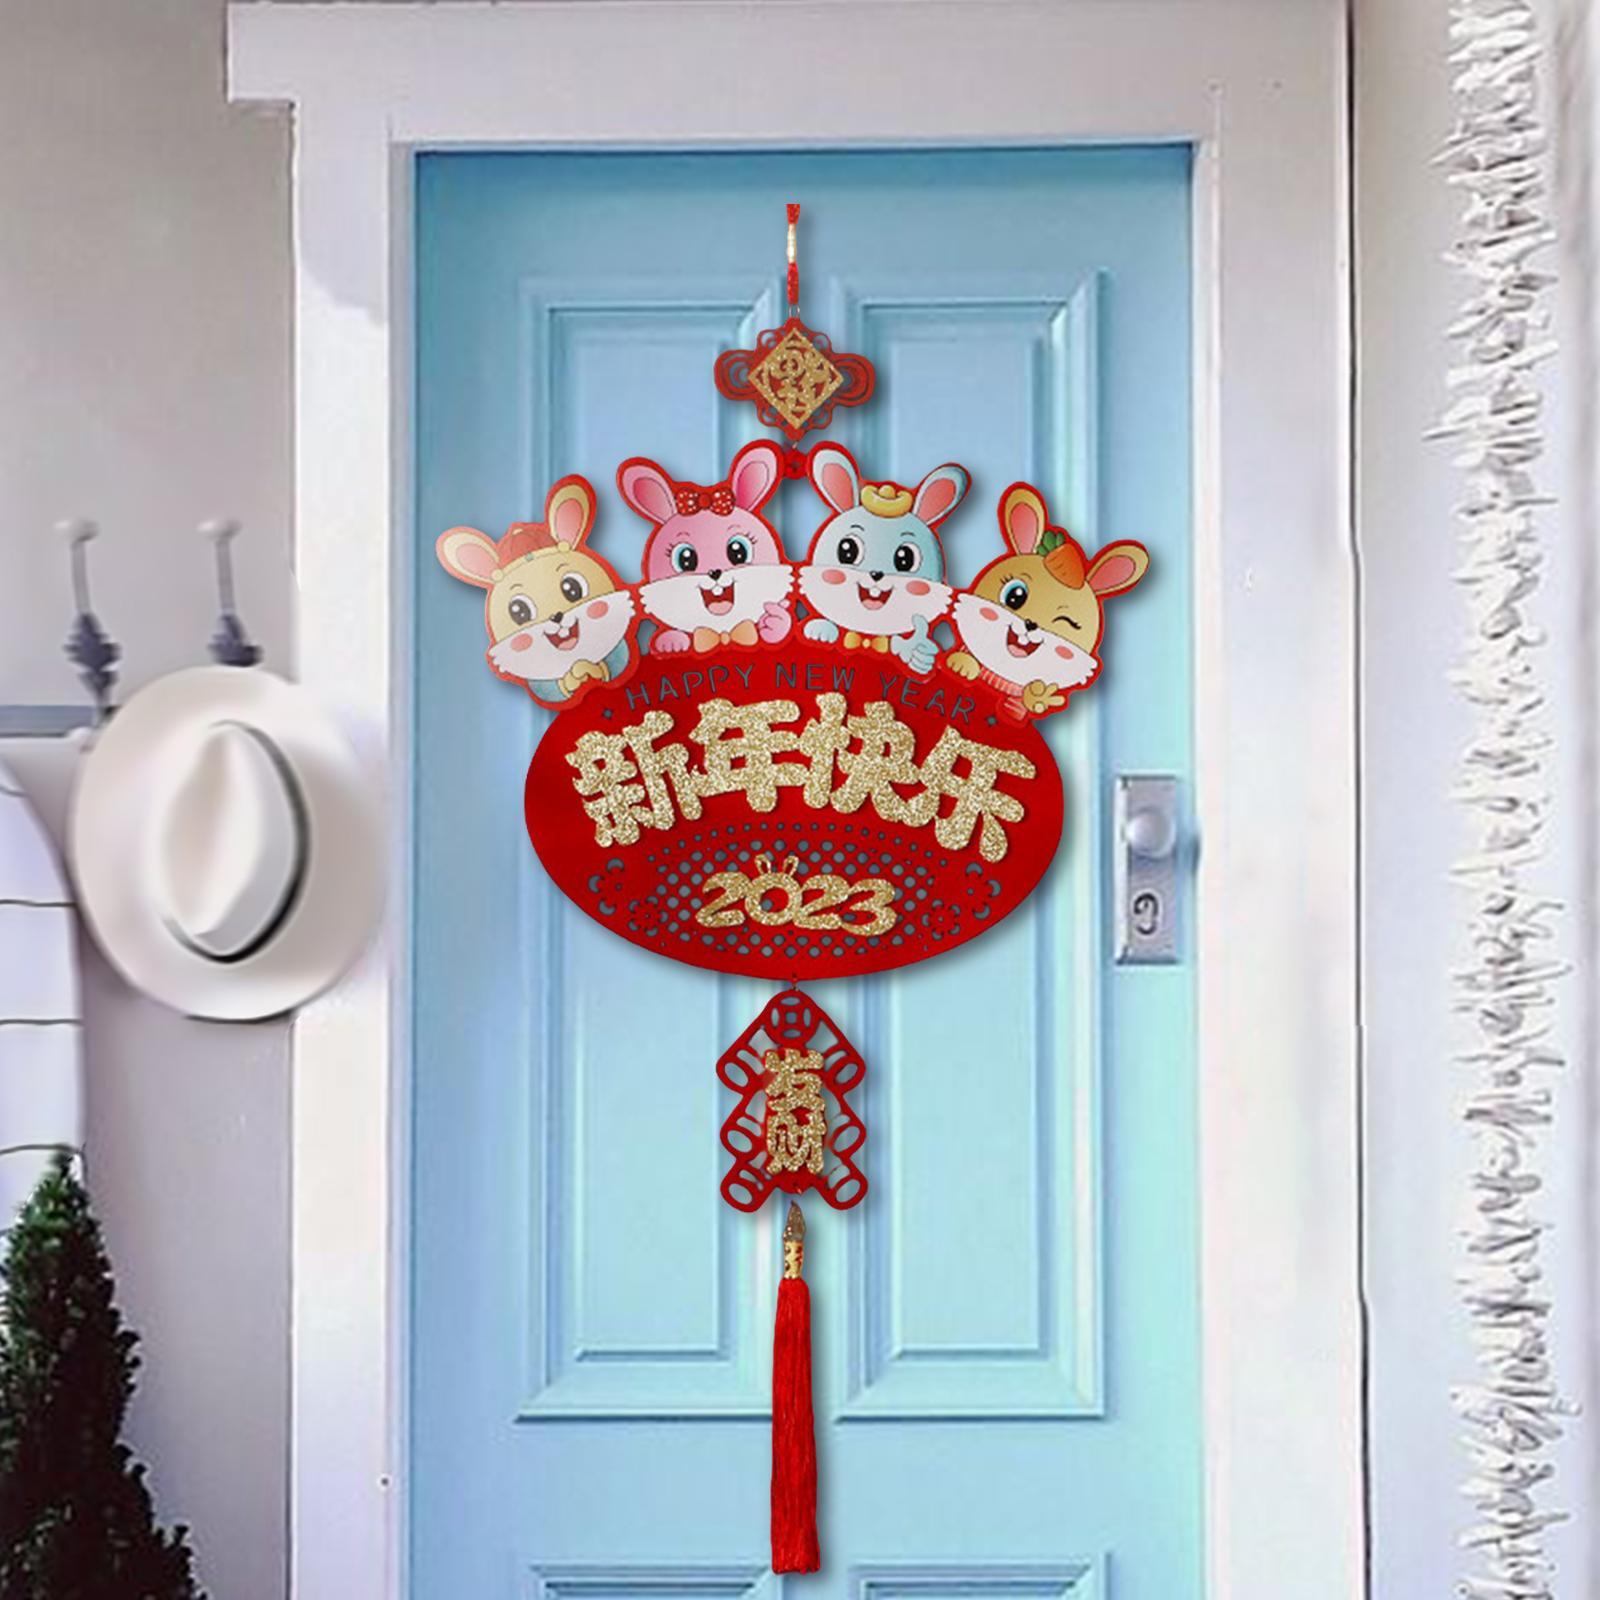 Spring Festival Decor Wall Hanging Pendant Chinese New Year Decorations for Celebration Souvenir